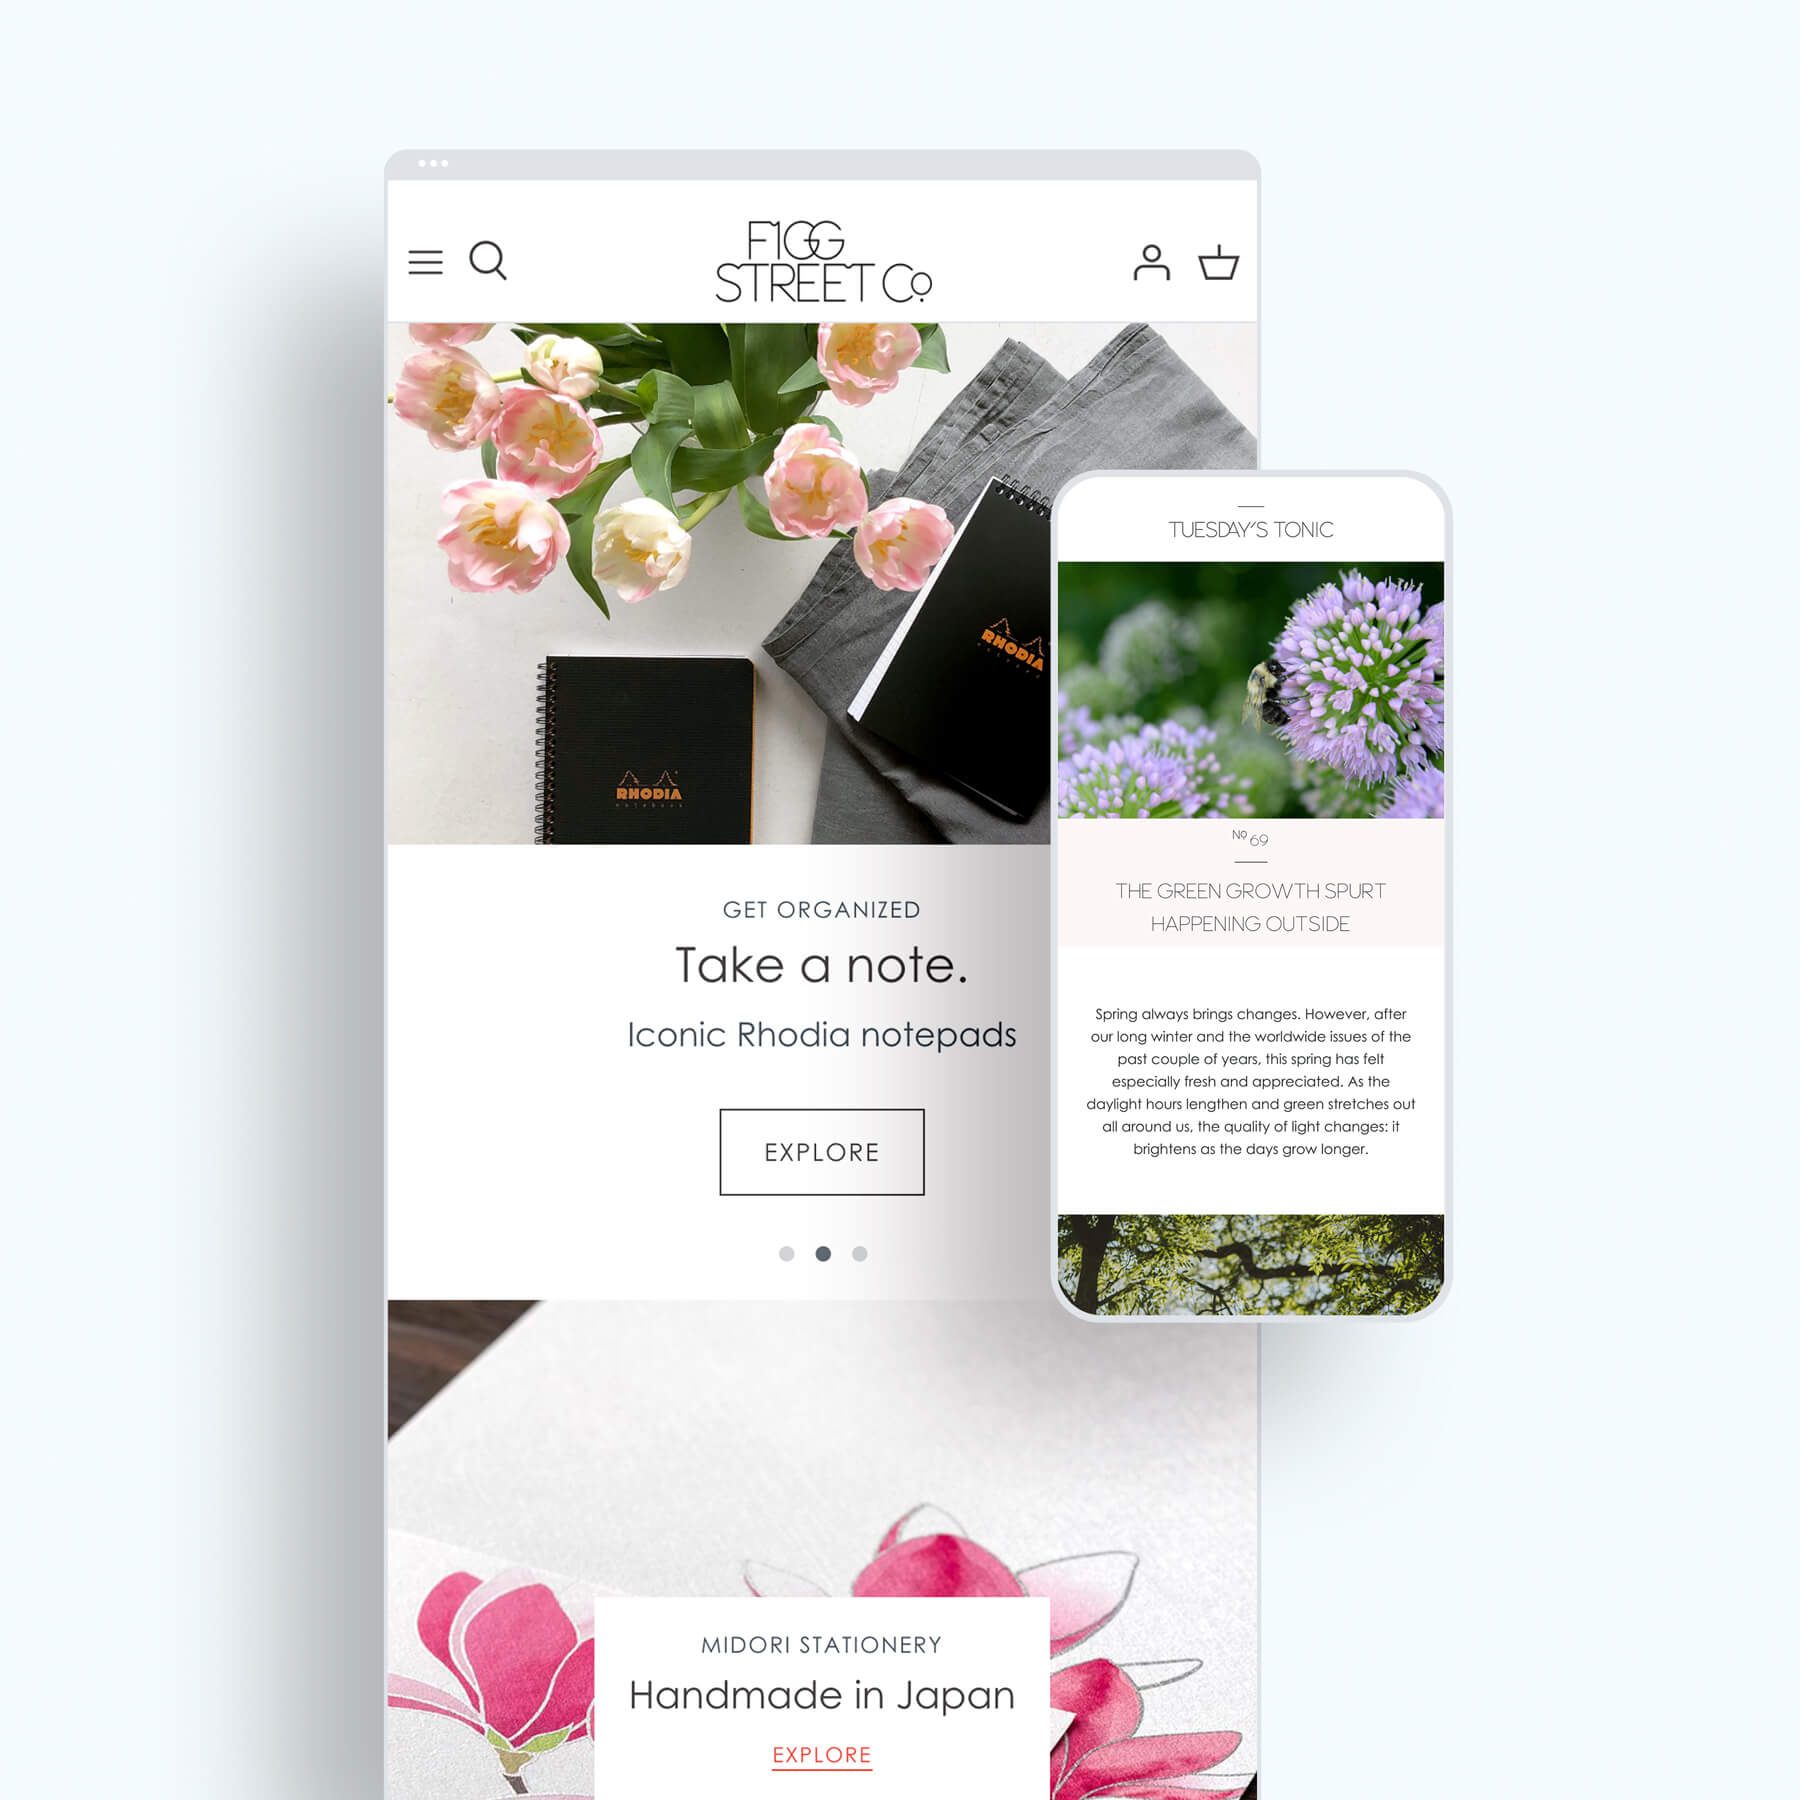 Shopify website design and Tuesday's Tonic digital marketing designed by Tulip Tree Creative for Figg Street Co.